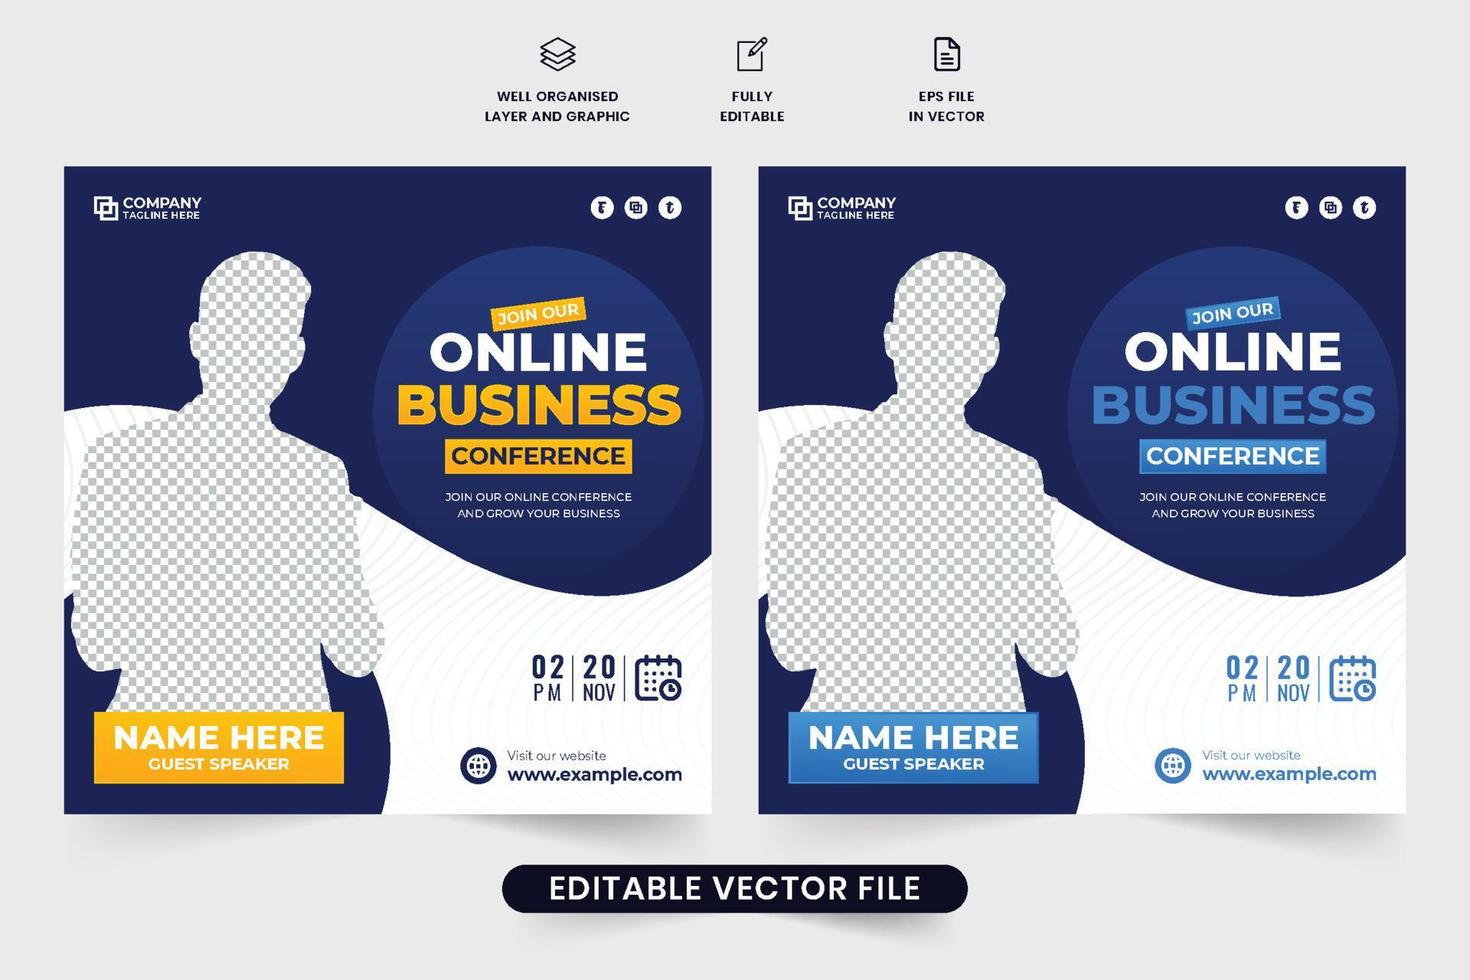 Business influencer and marketing agency webinar template for marketing. Corporate business web conference and advertisement web banner design with yellow and blue colors. Business webinar poster. vector